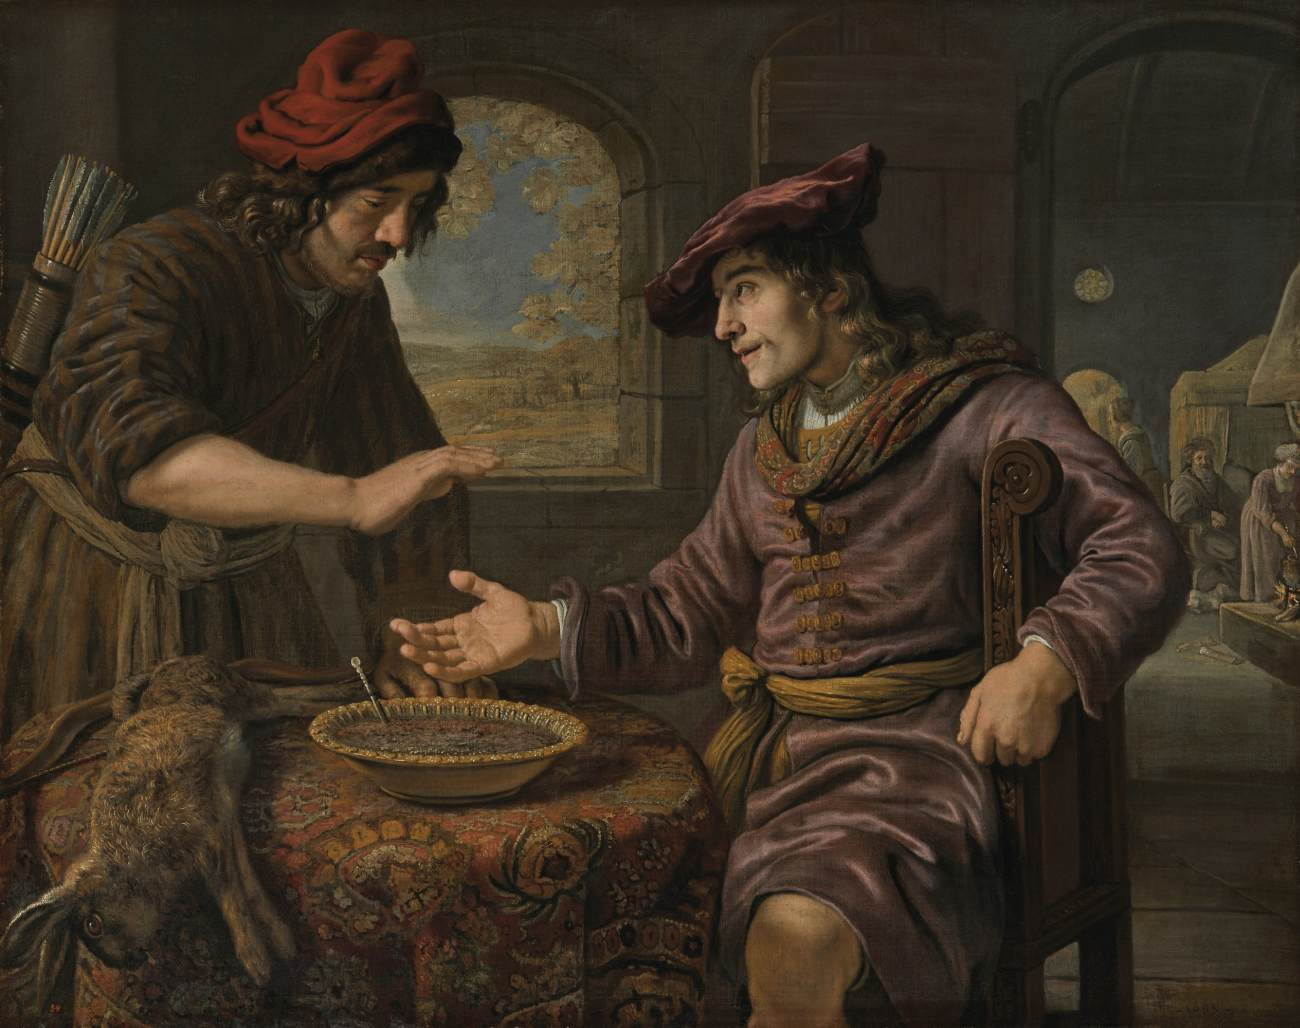 Esau Sells James the Birthright Next to a Bowl of Lentils